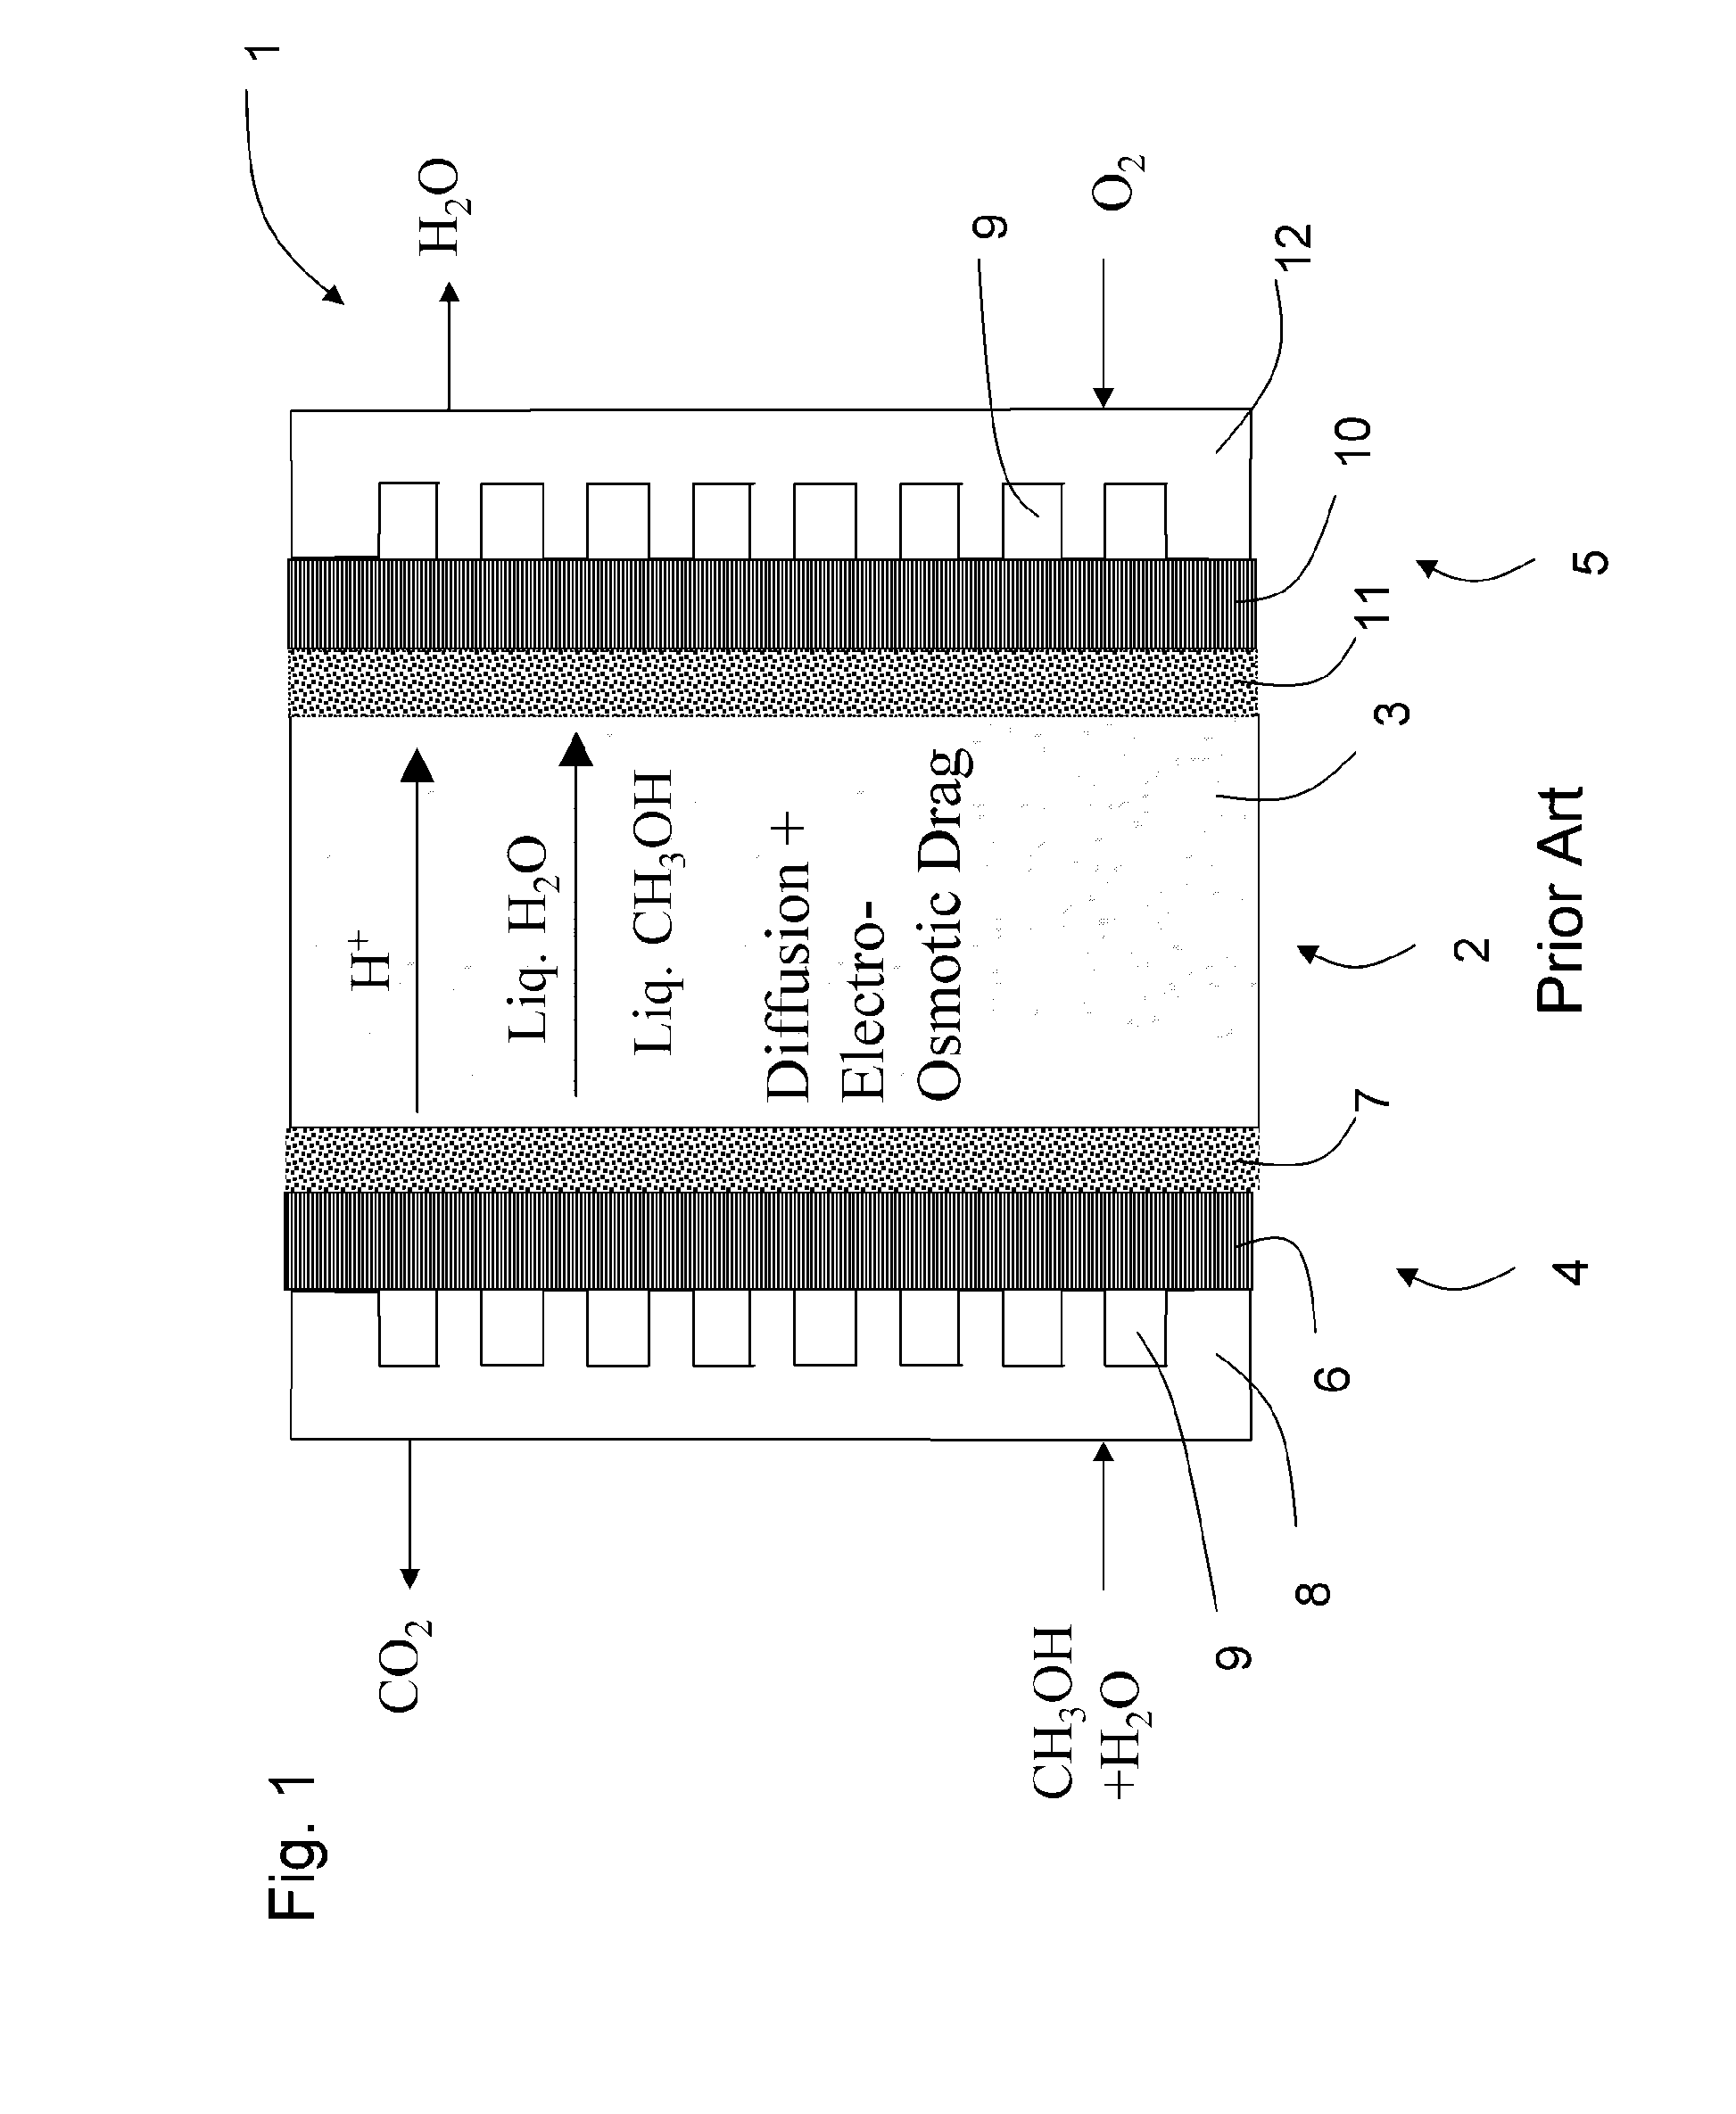 System For Generating Electrical Energy Comprising An Electrochemical Reformer And A Fuel Cell